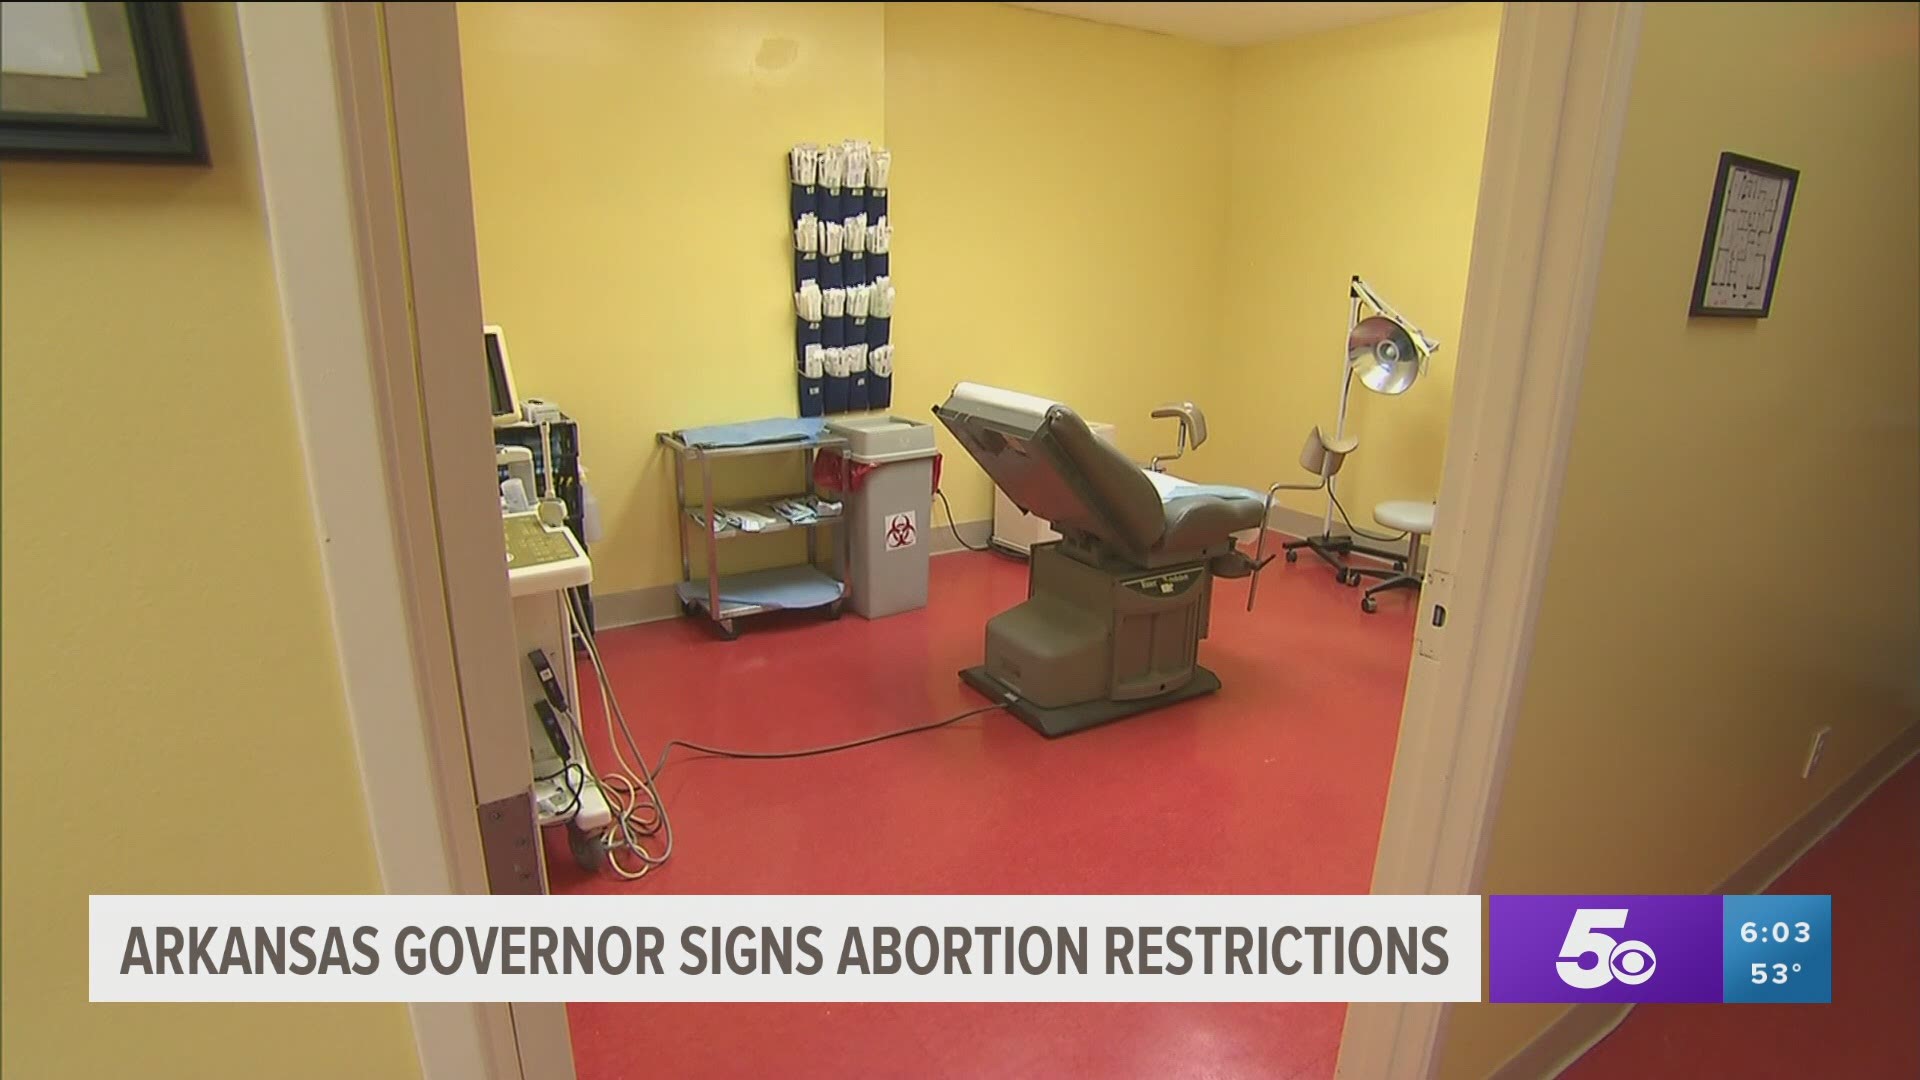 Arkansas Governor signs abortion restrictions